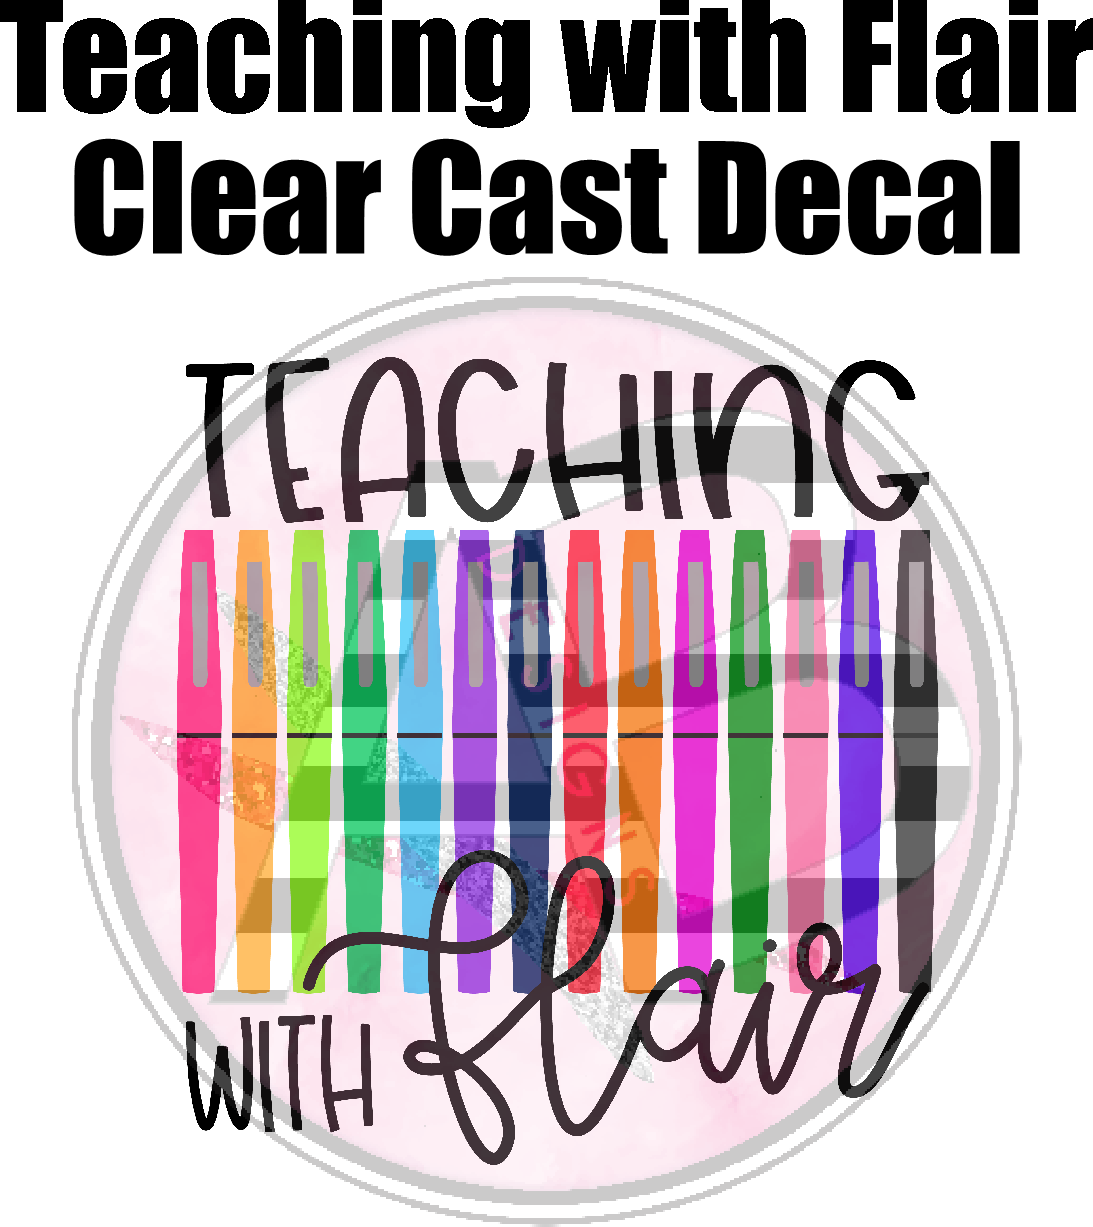 Teaching with Flair - Clear Cast Decal